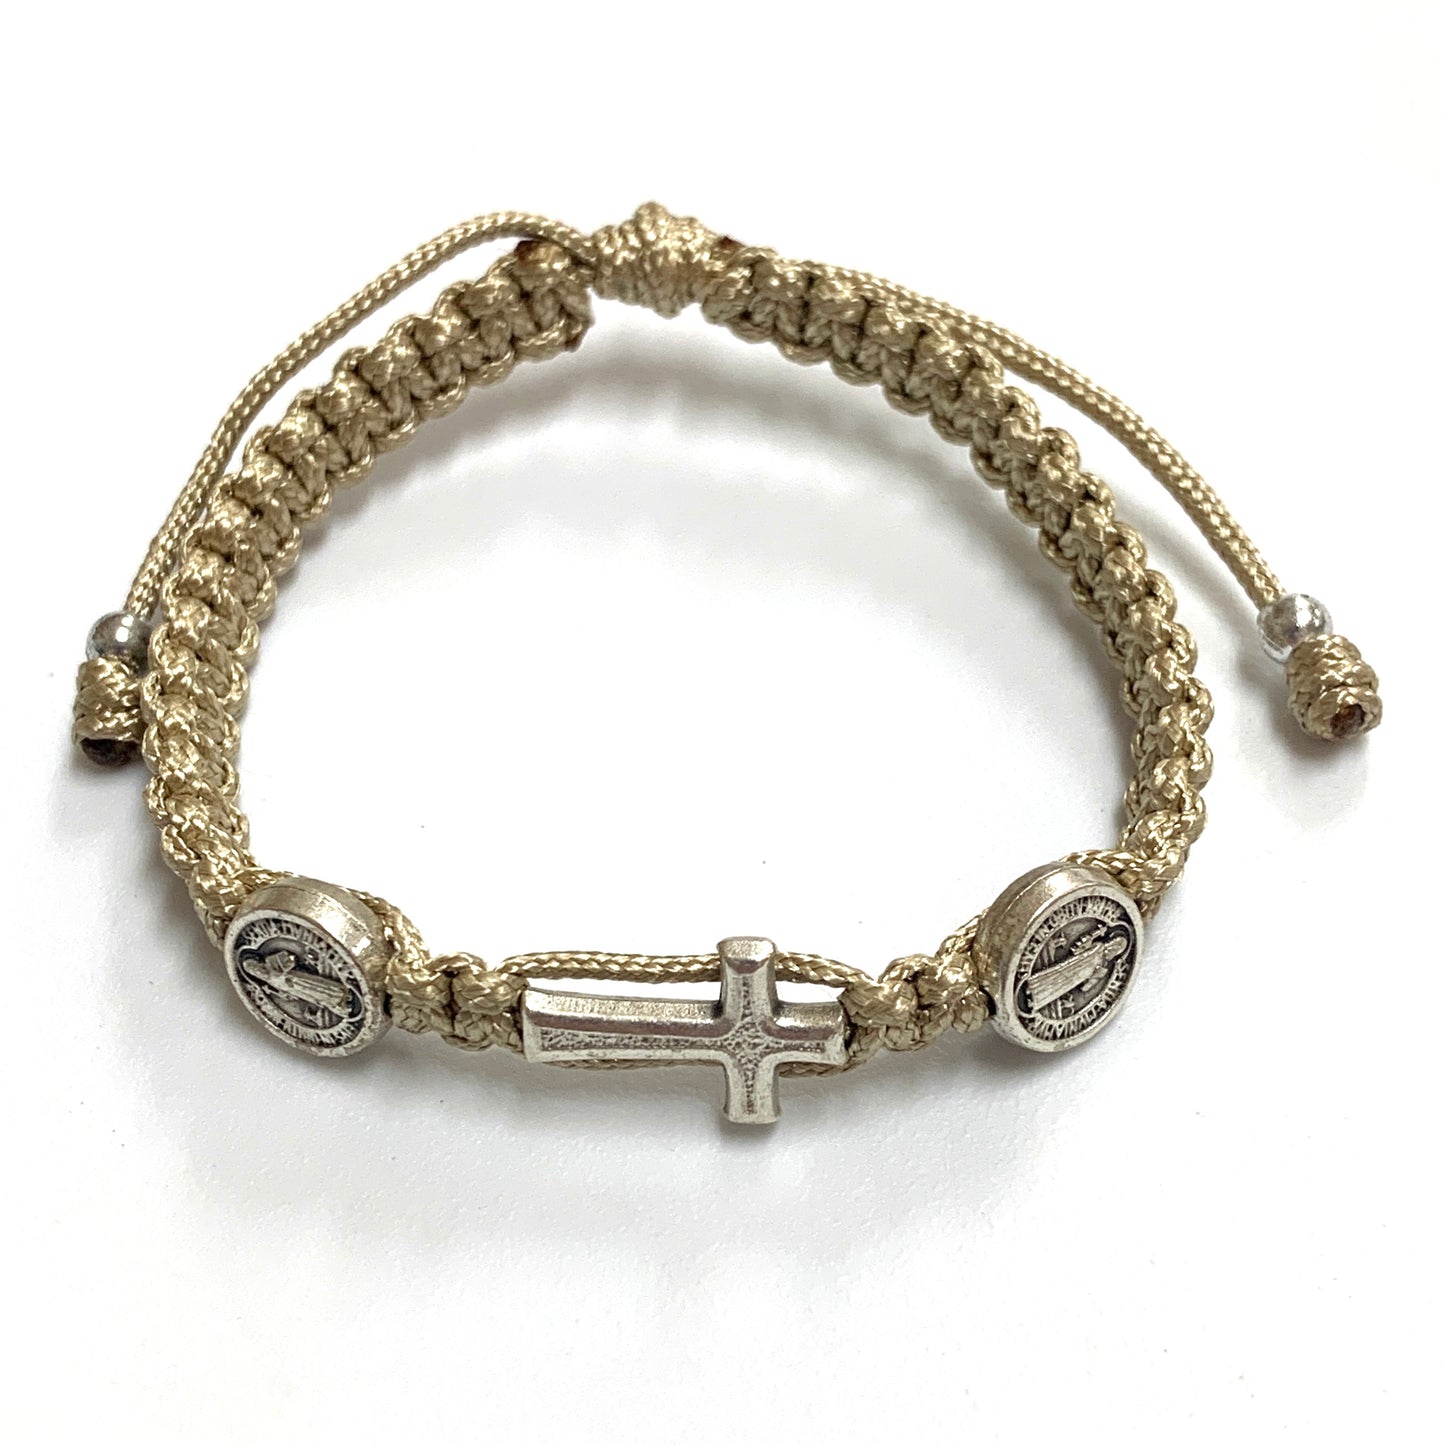 Braided Bracelet with St. Benedict Medal and Metal Cross of Assorted Colors